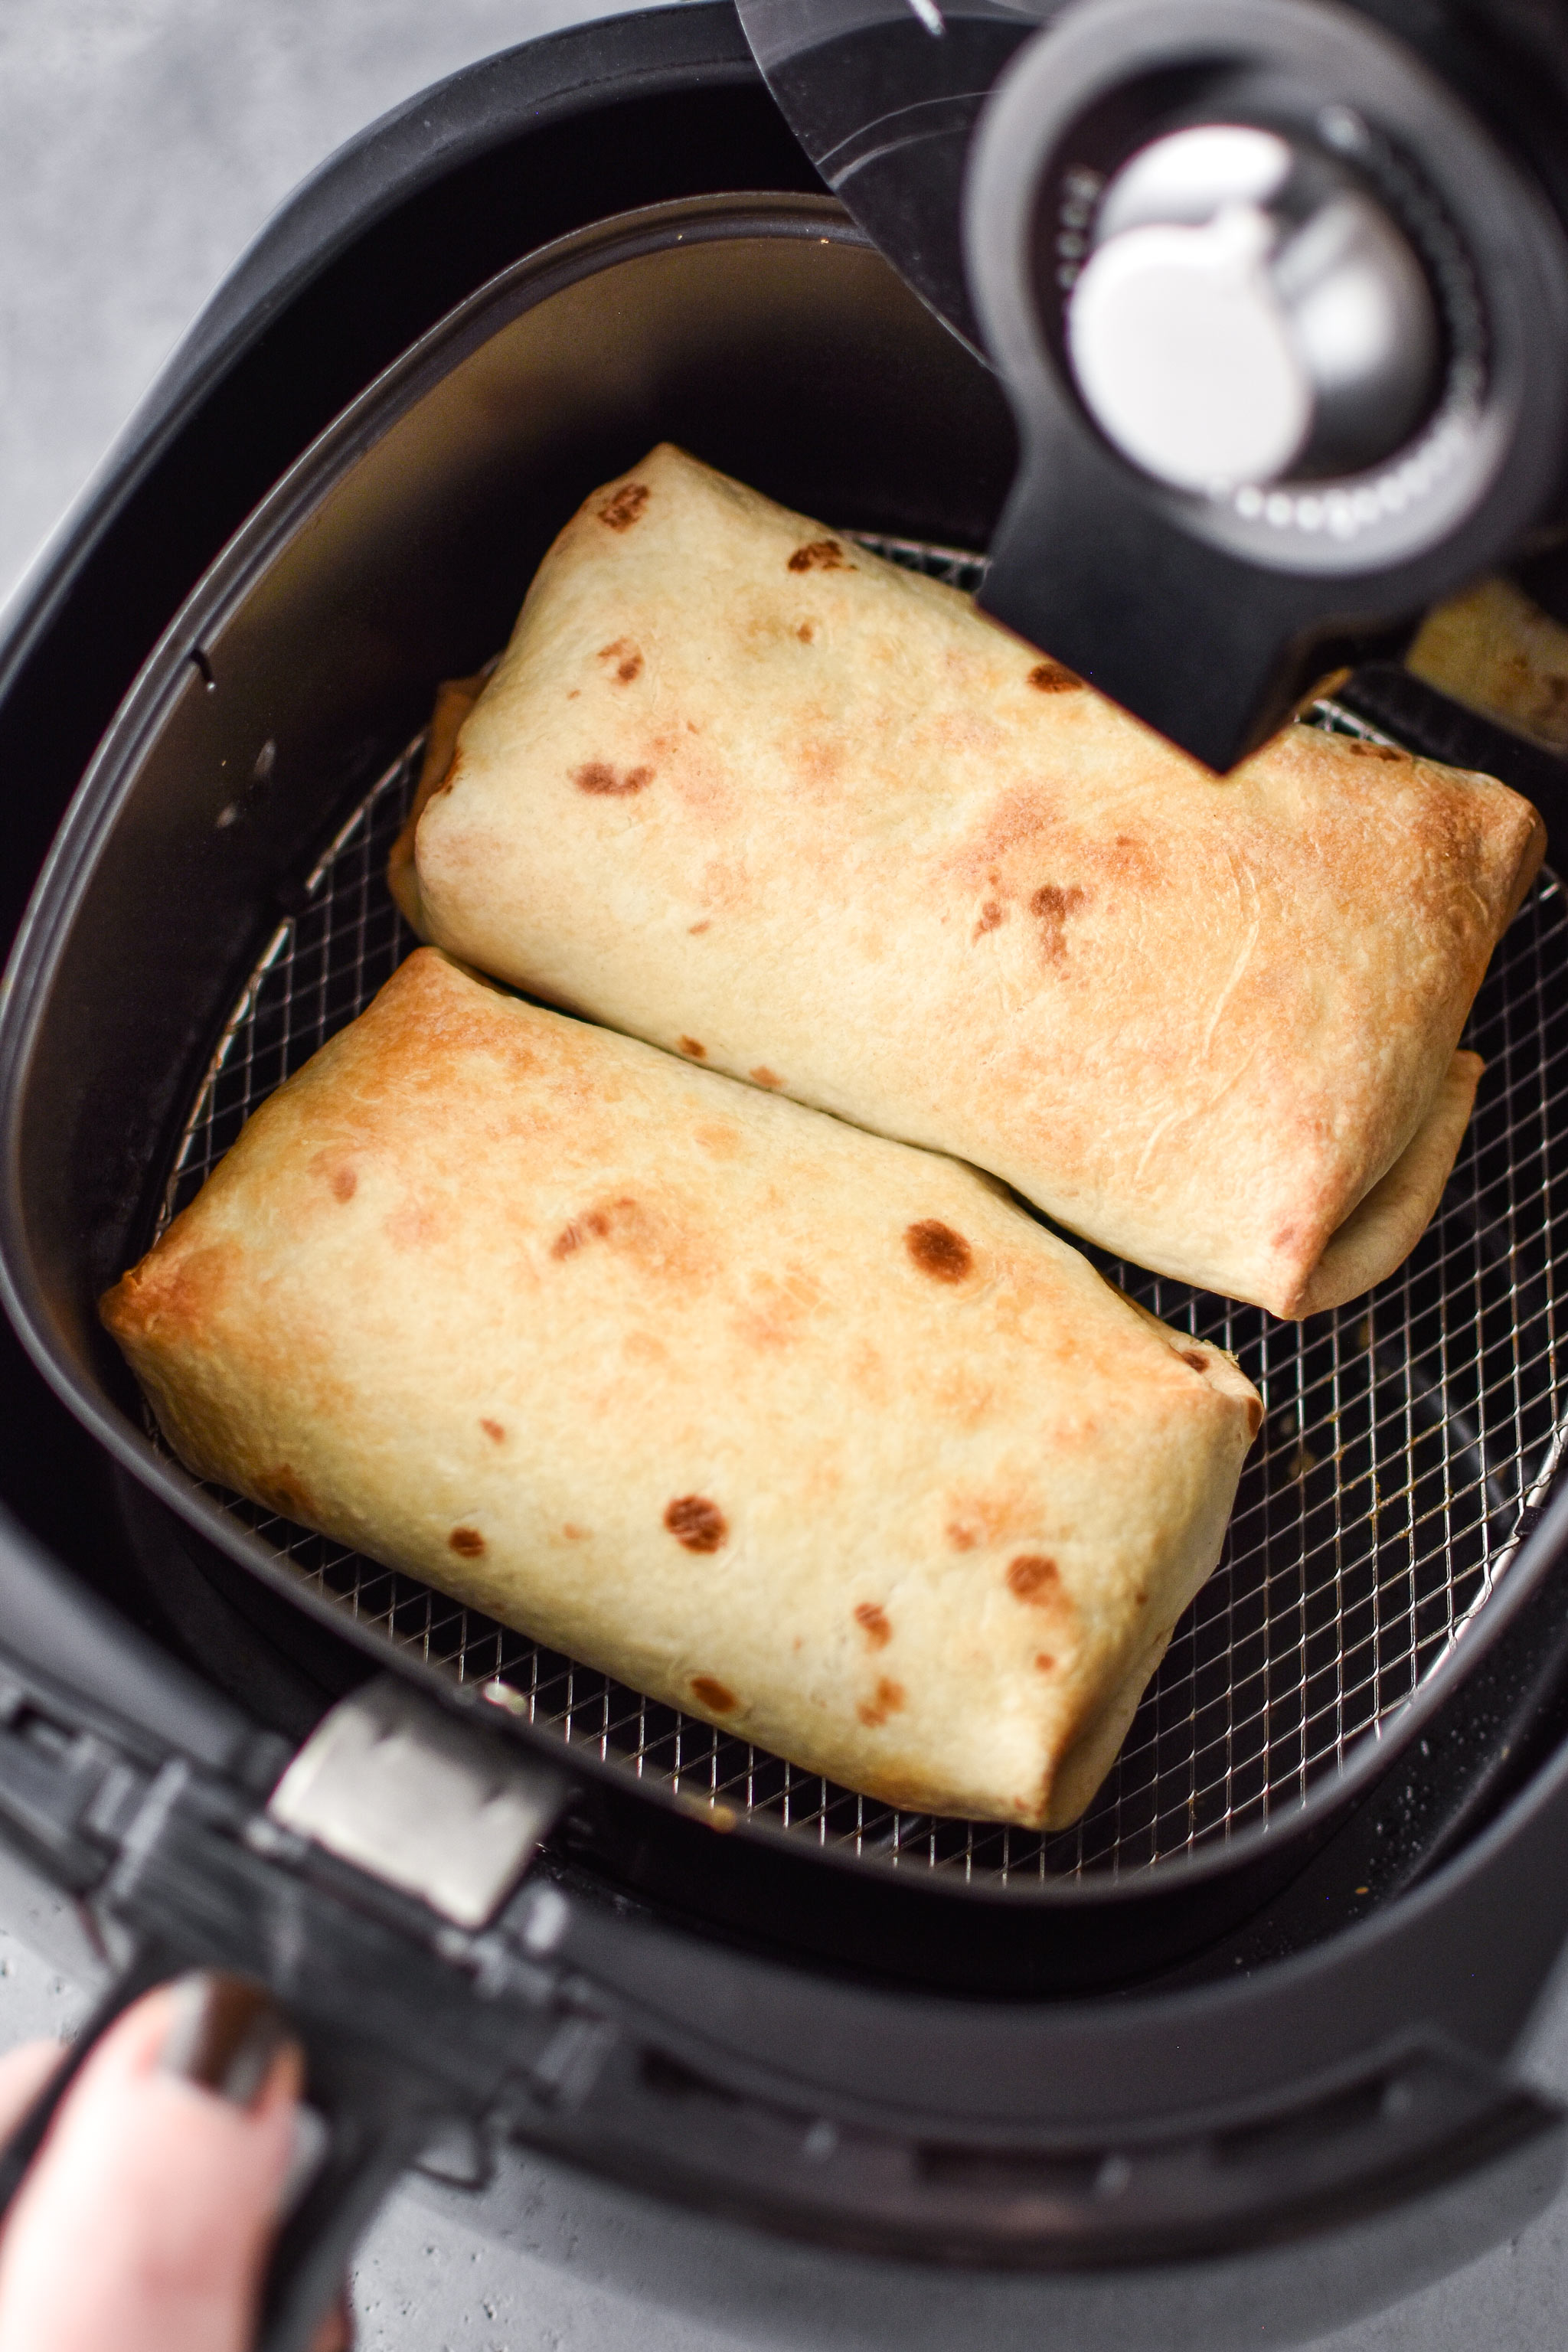 How to make chimichangas in an air fryer